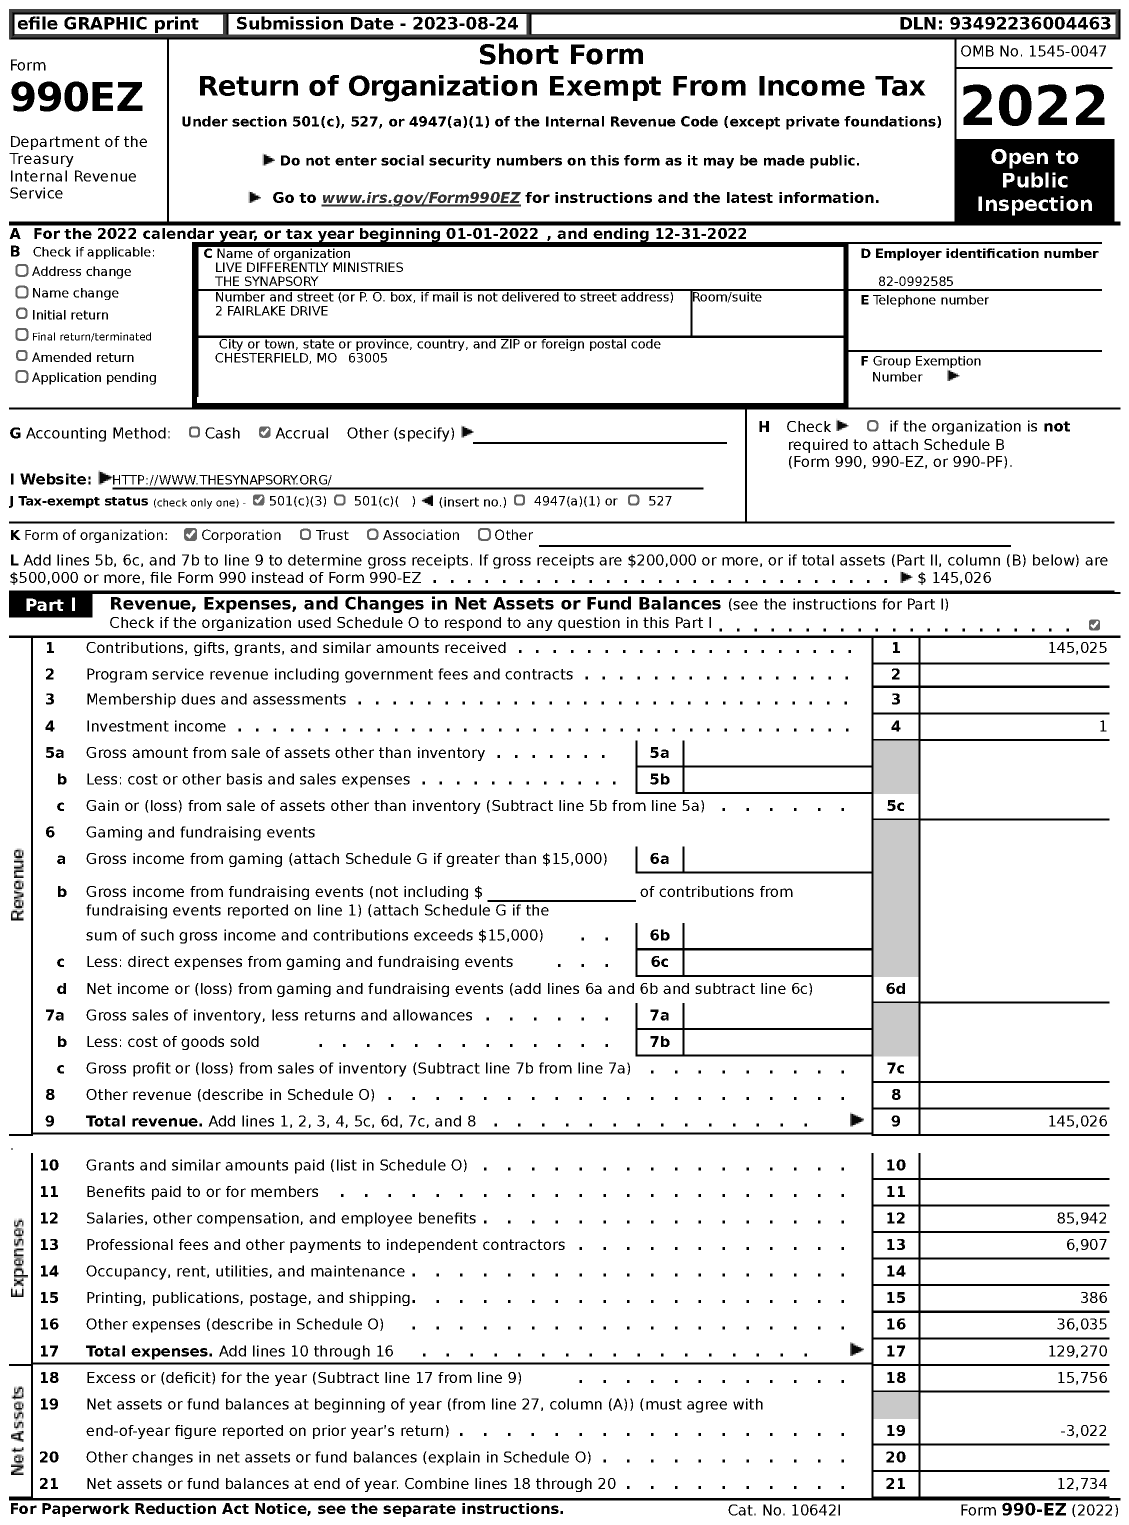 Image of first page of 2022 Form 990EZ for Live Differently Ministries the Synapsory